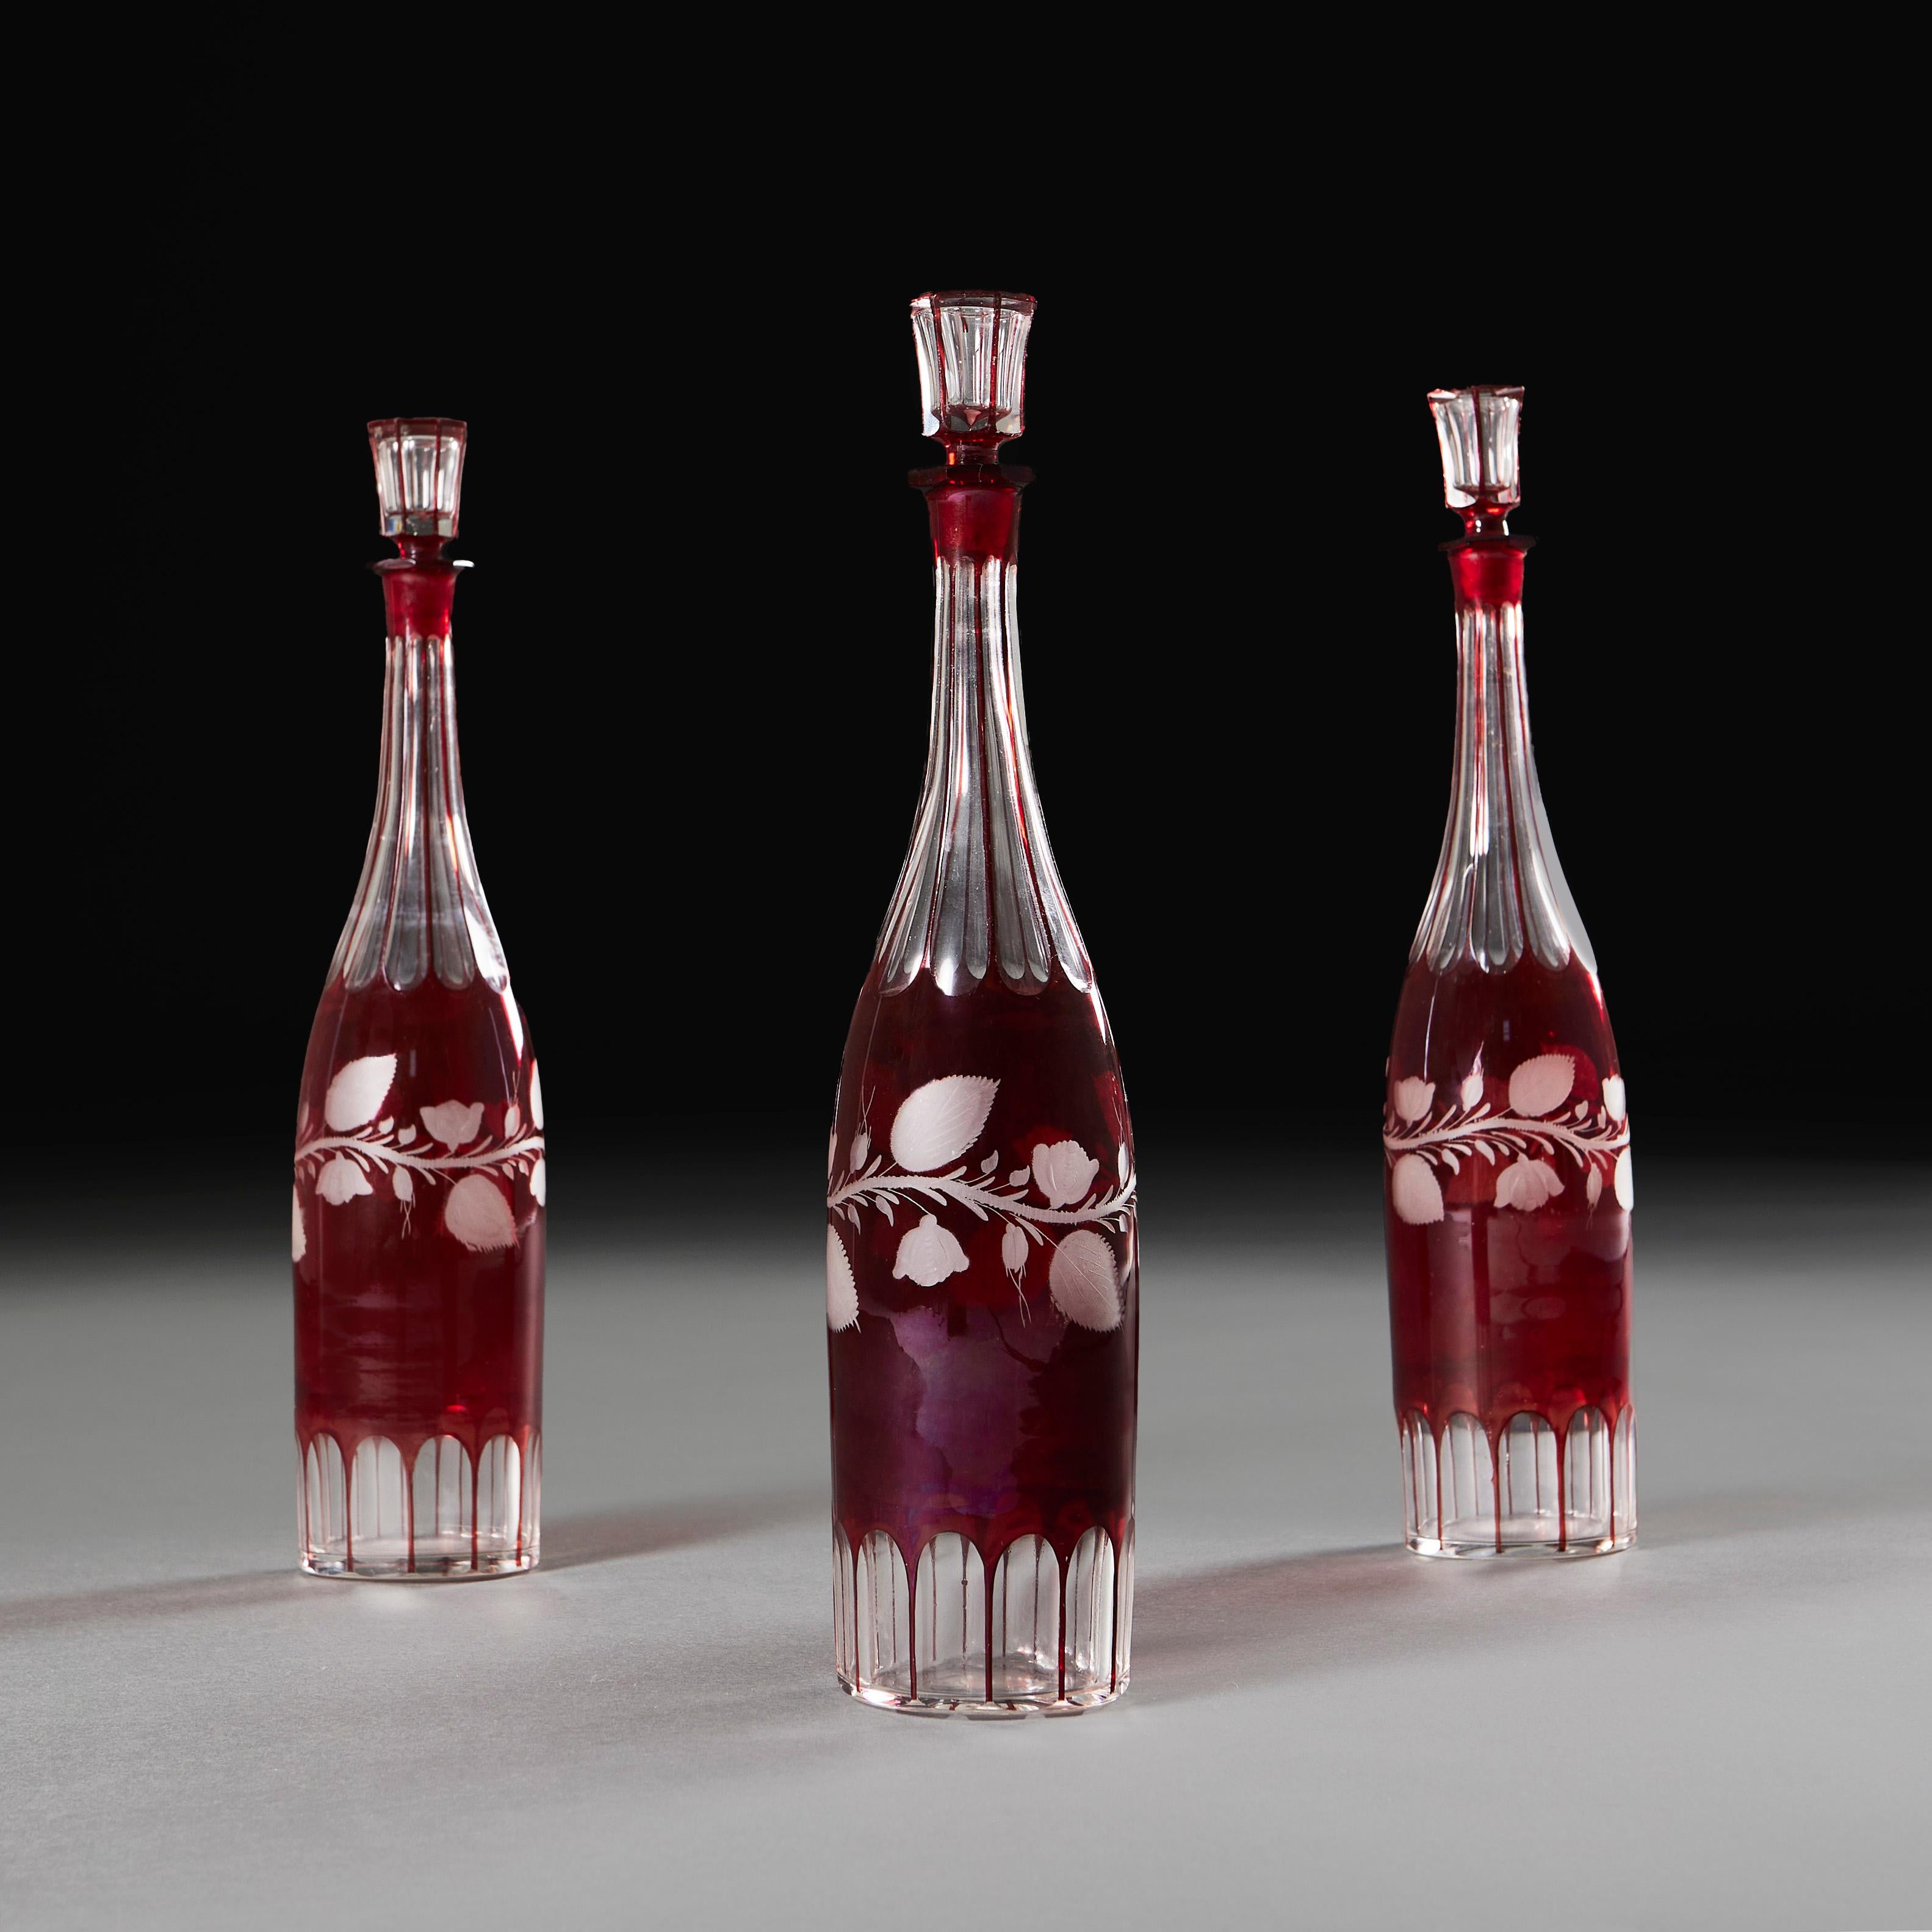 England, circa 1870
A set of three late nineteenth century red cut glass spirit decanters, the bodies engraved with scrolling vines, with faceted bases and stoppers.